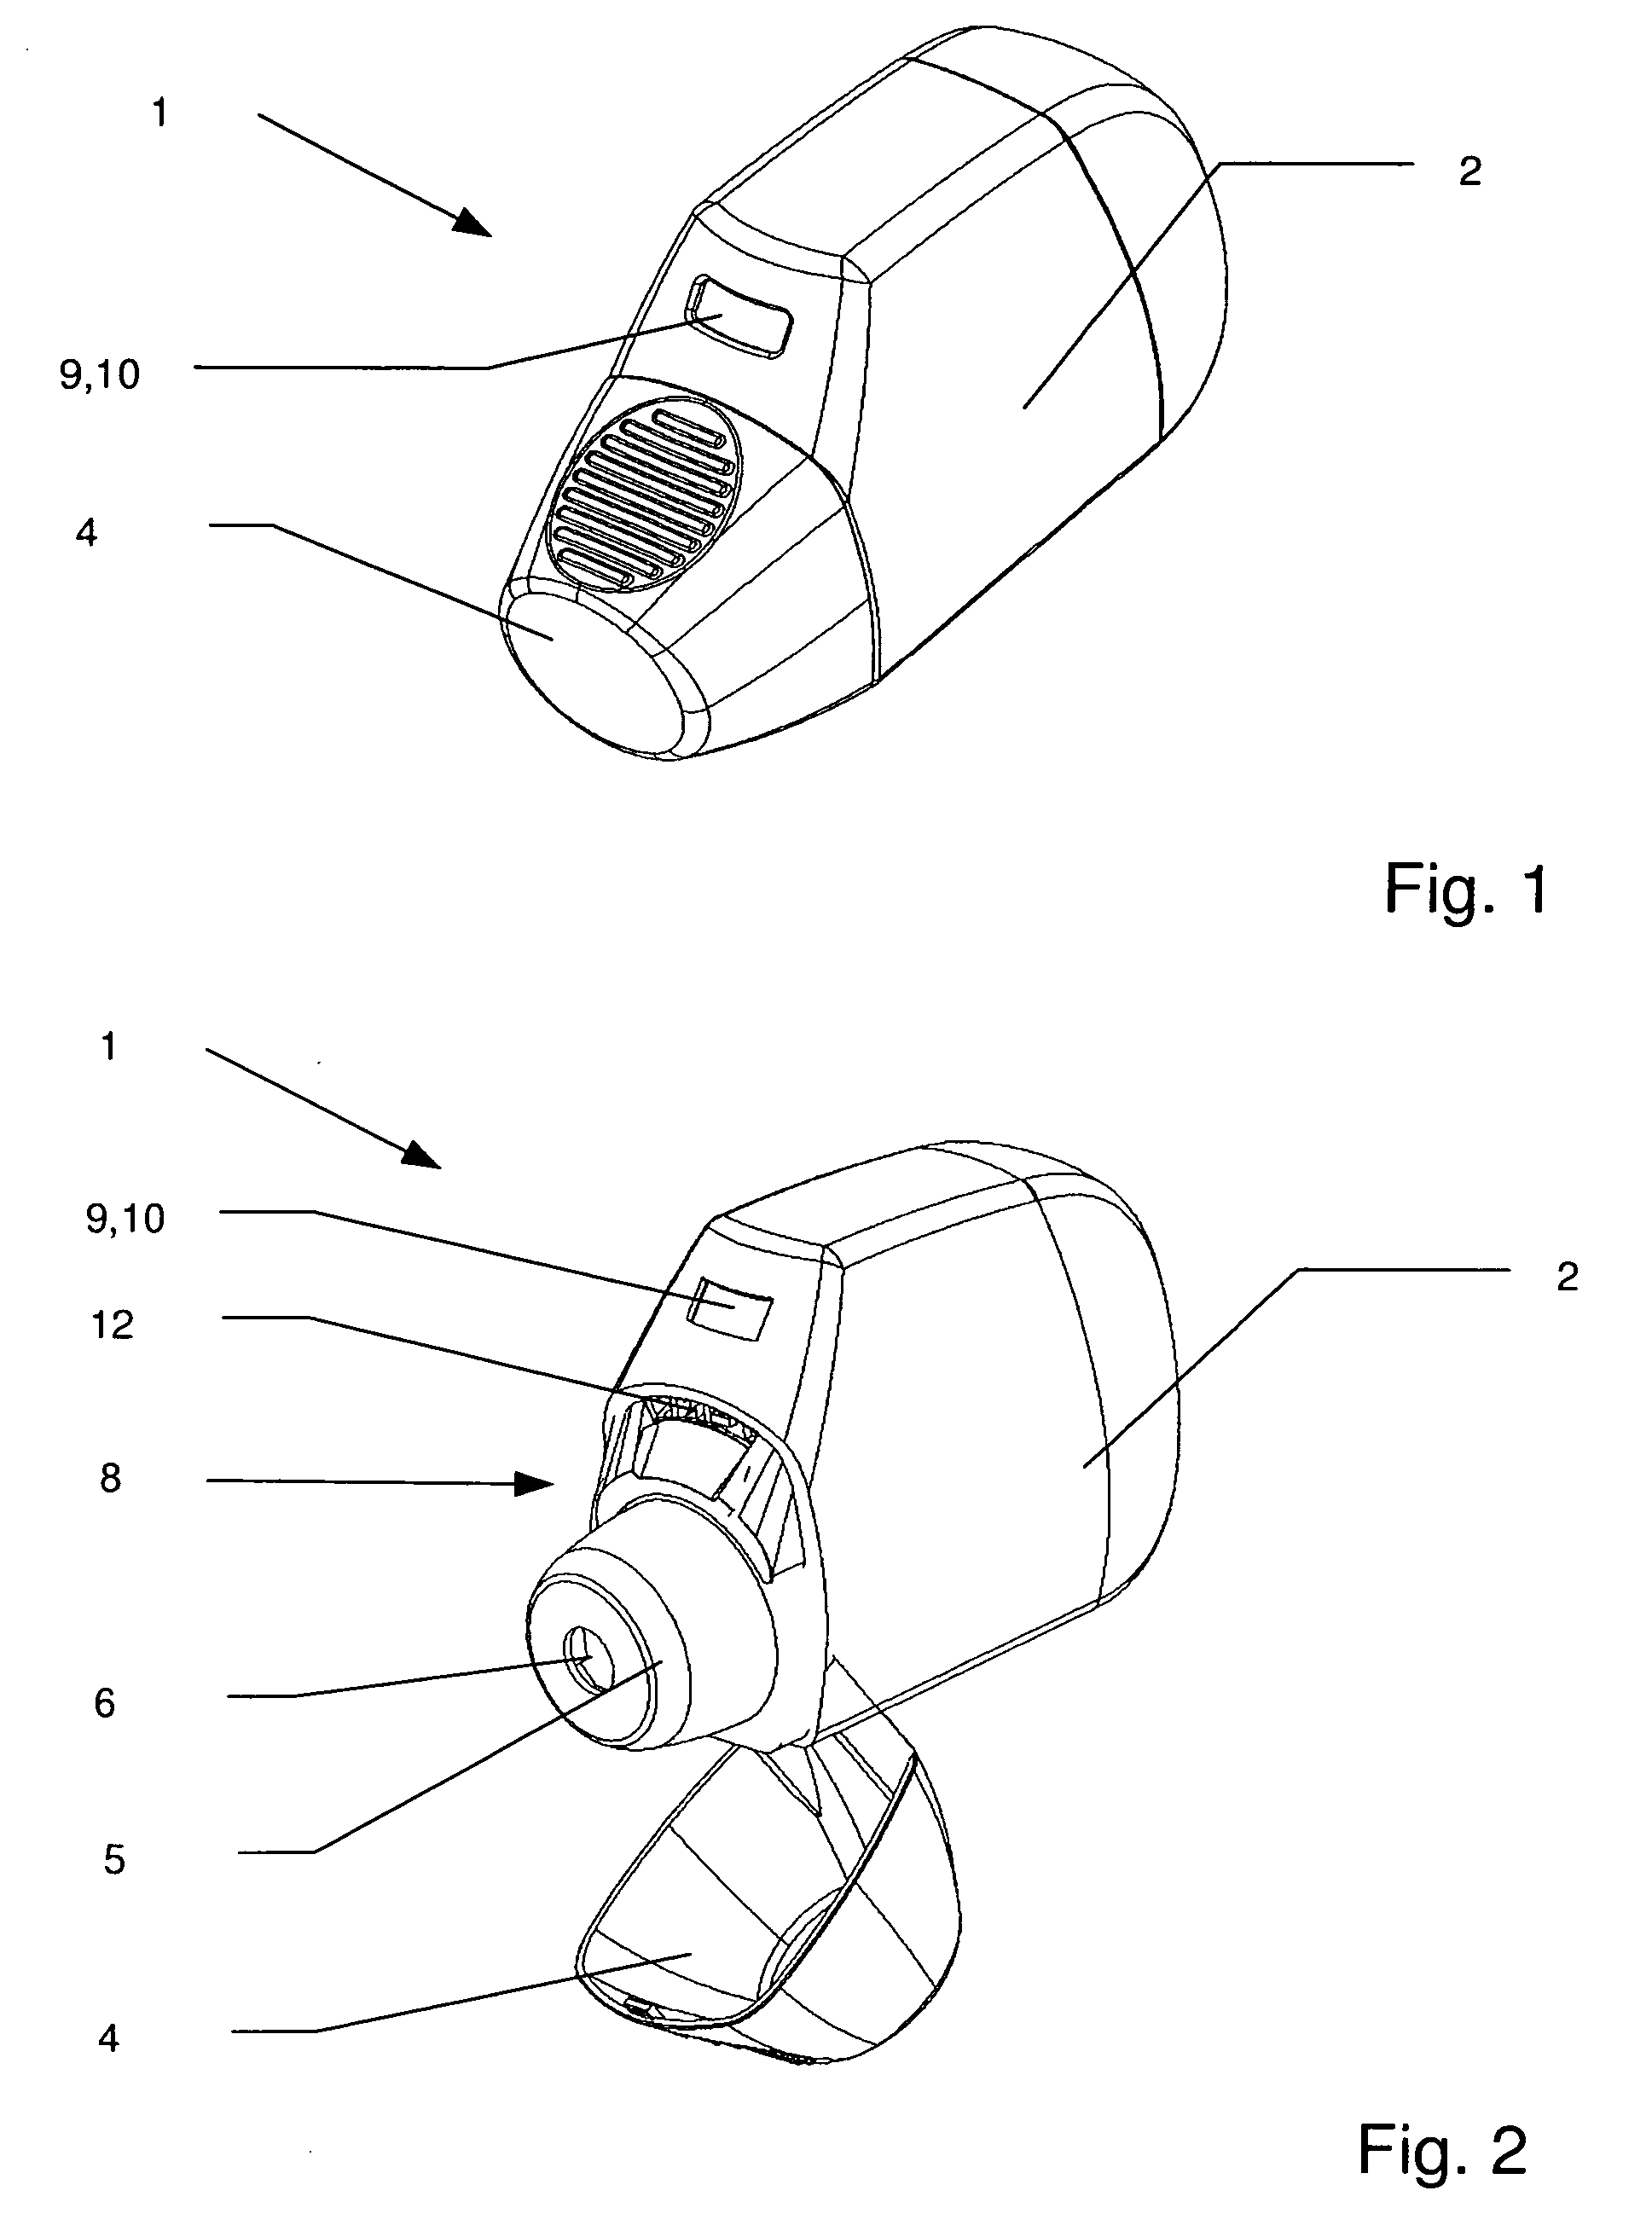 Inhalation device for drugs in powder form